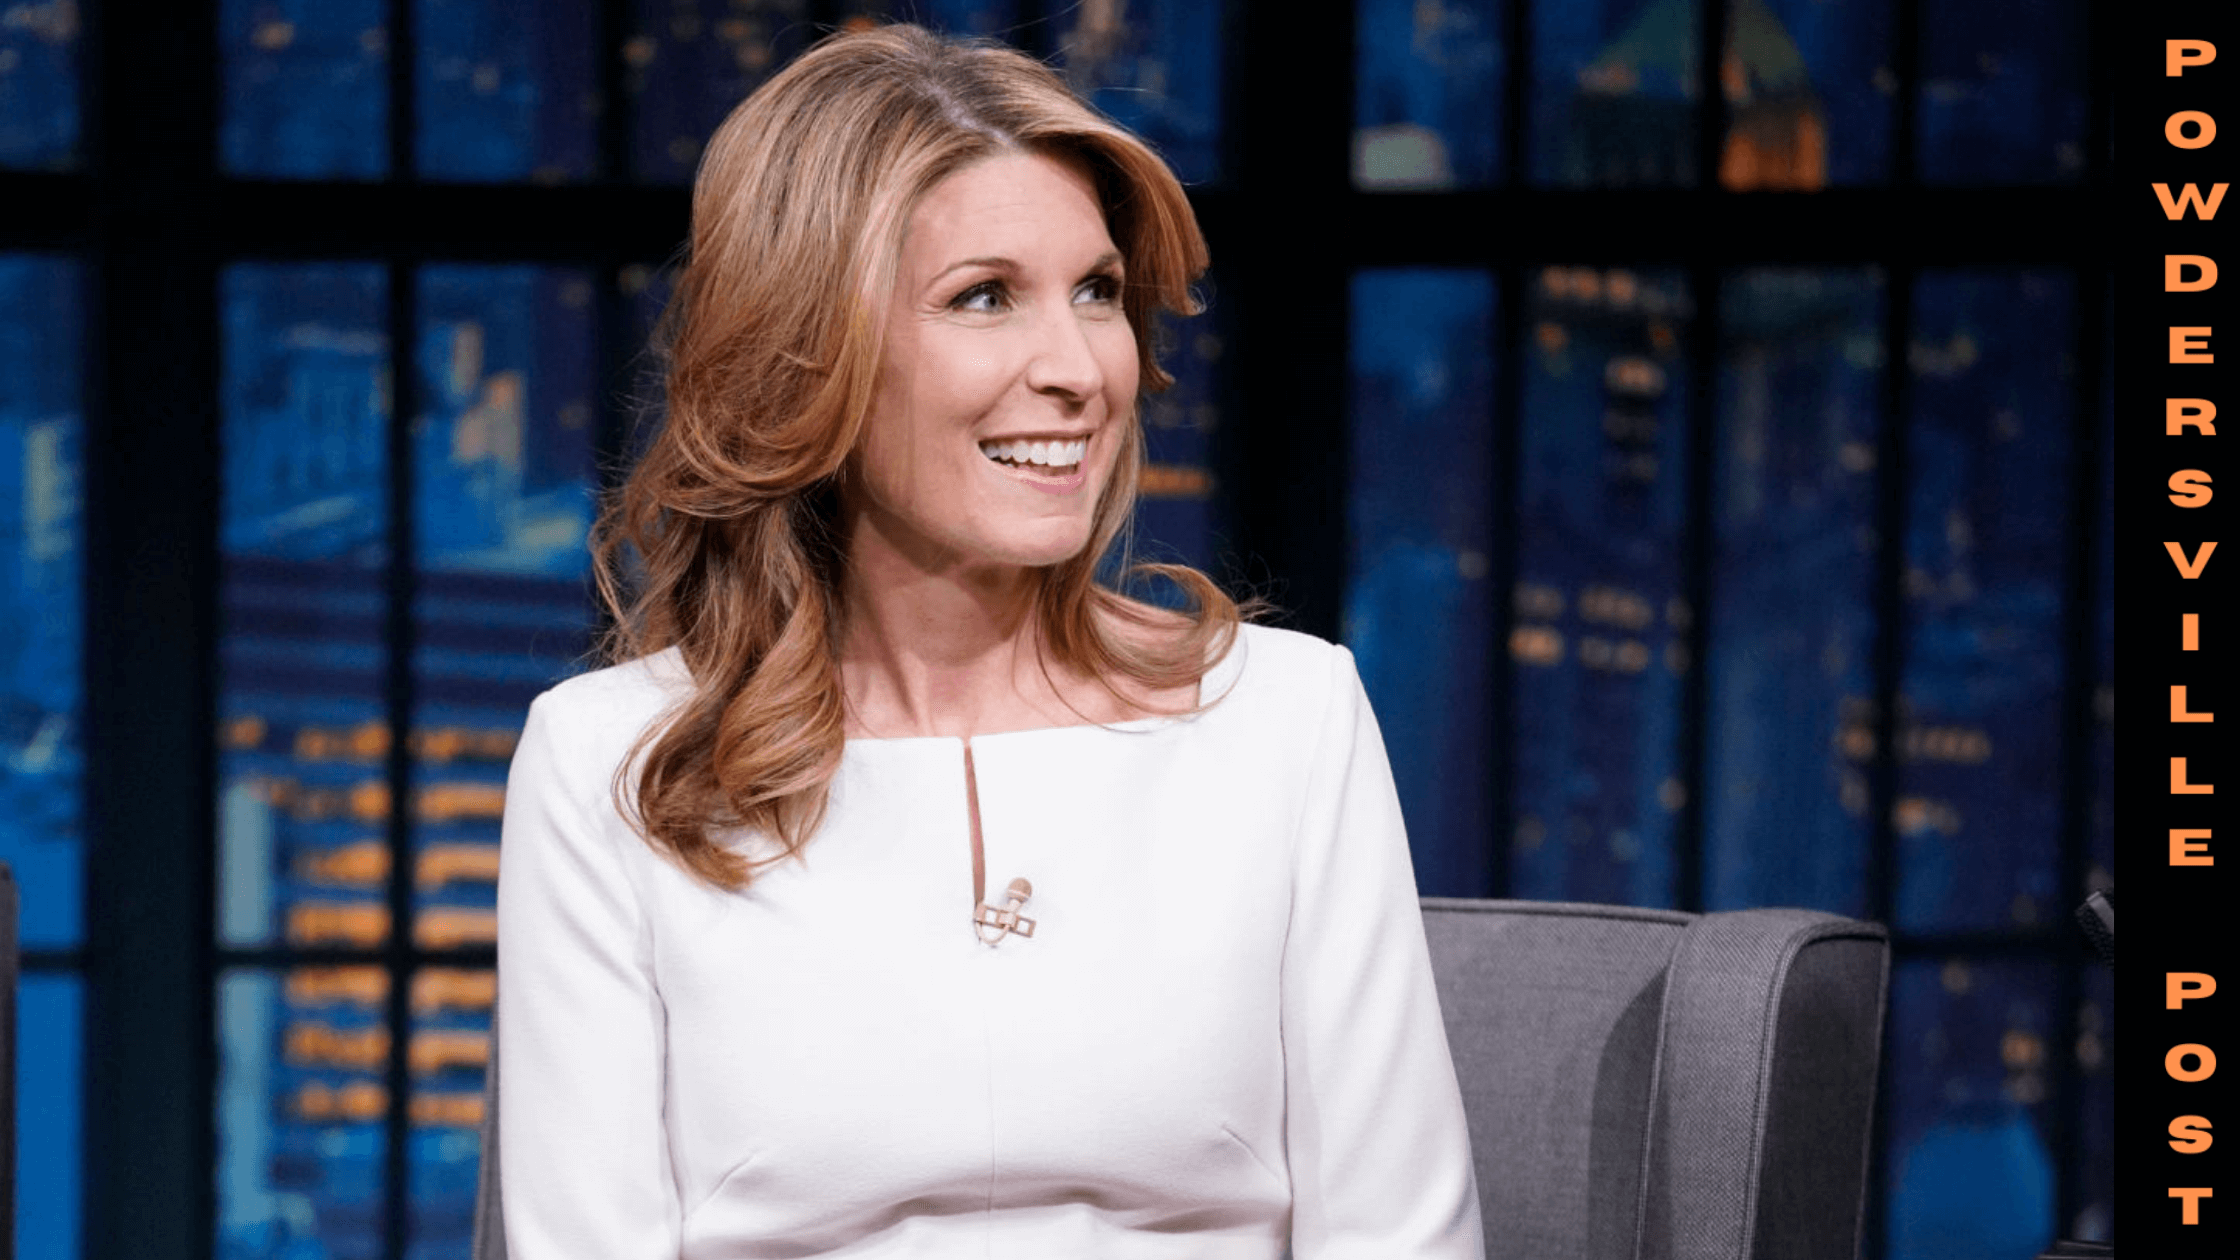 Nicolle Wallace Opens Up About Her ' Career Choice As Author And Journalist' - Wiki, Age, And Net Worth